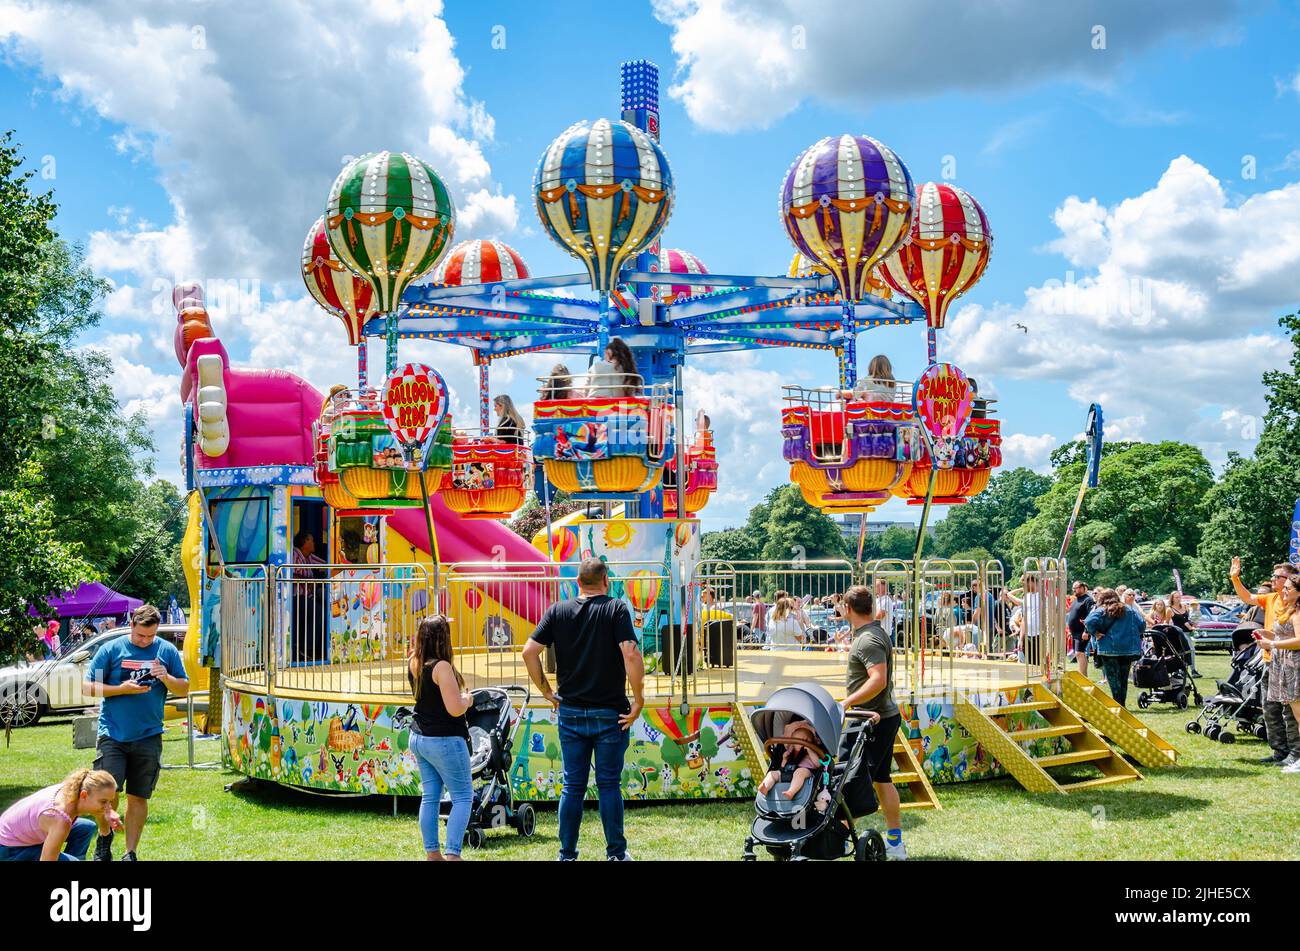 A children's fairground ride with carriages with balloons which spin and rise and fall. Stock Photo